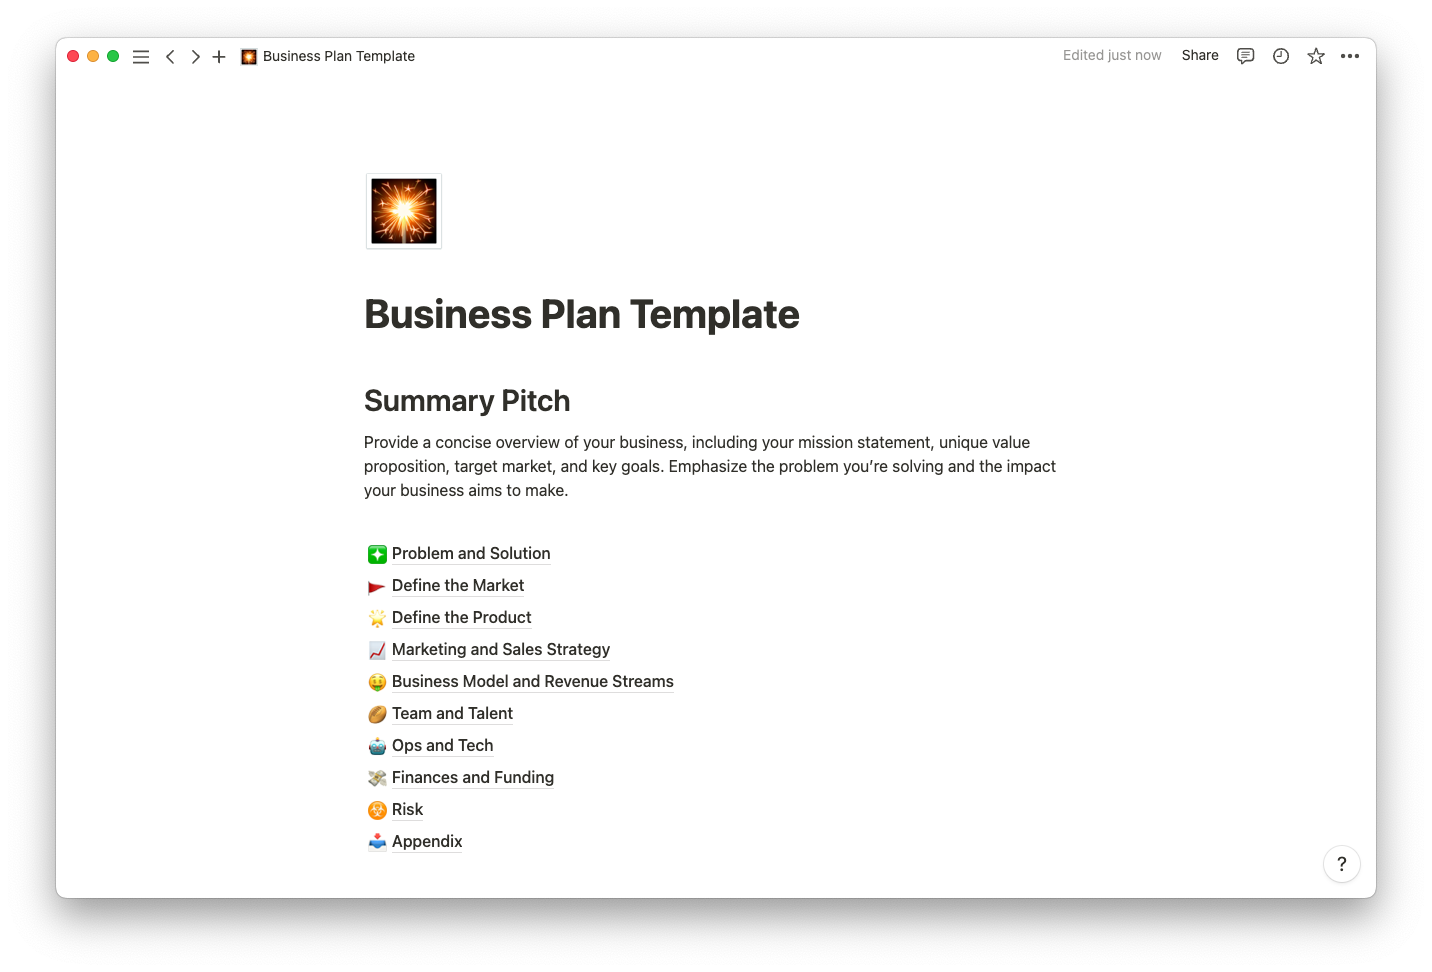 How to create a business plan thumbnail